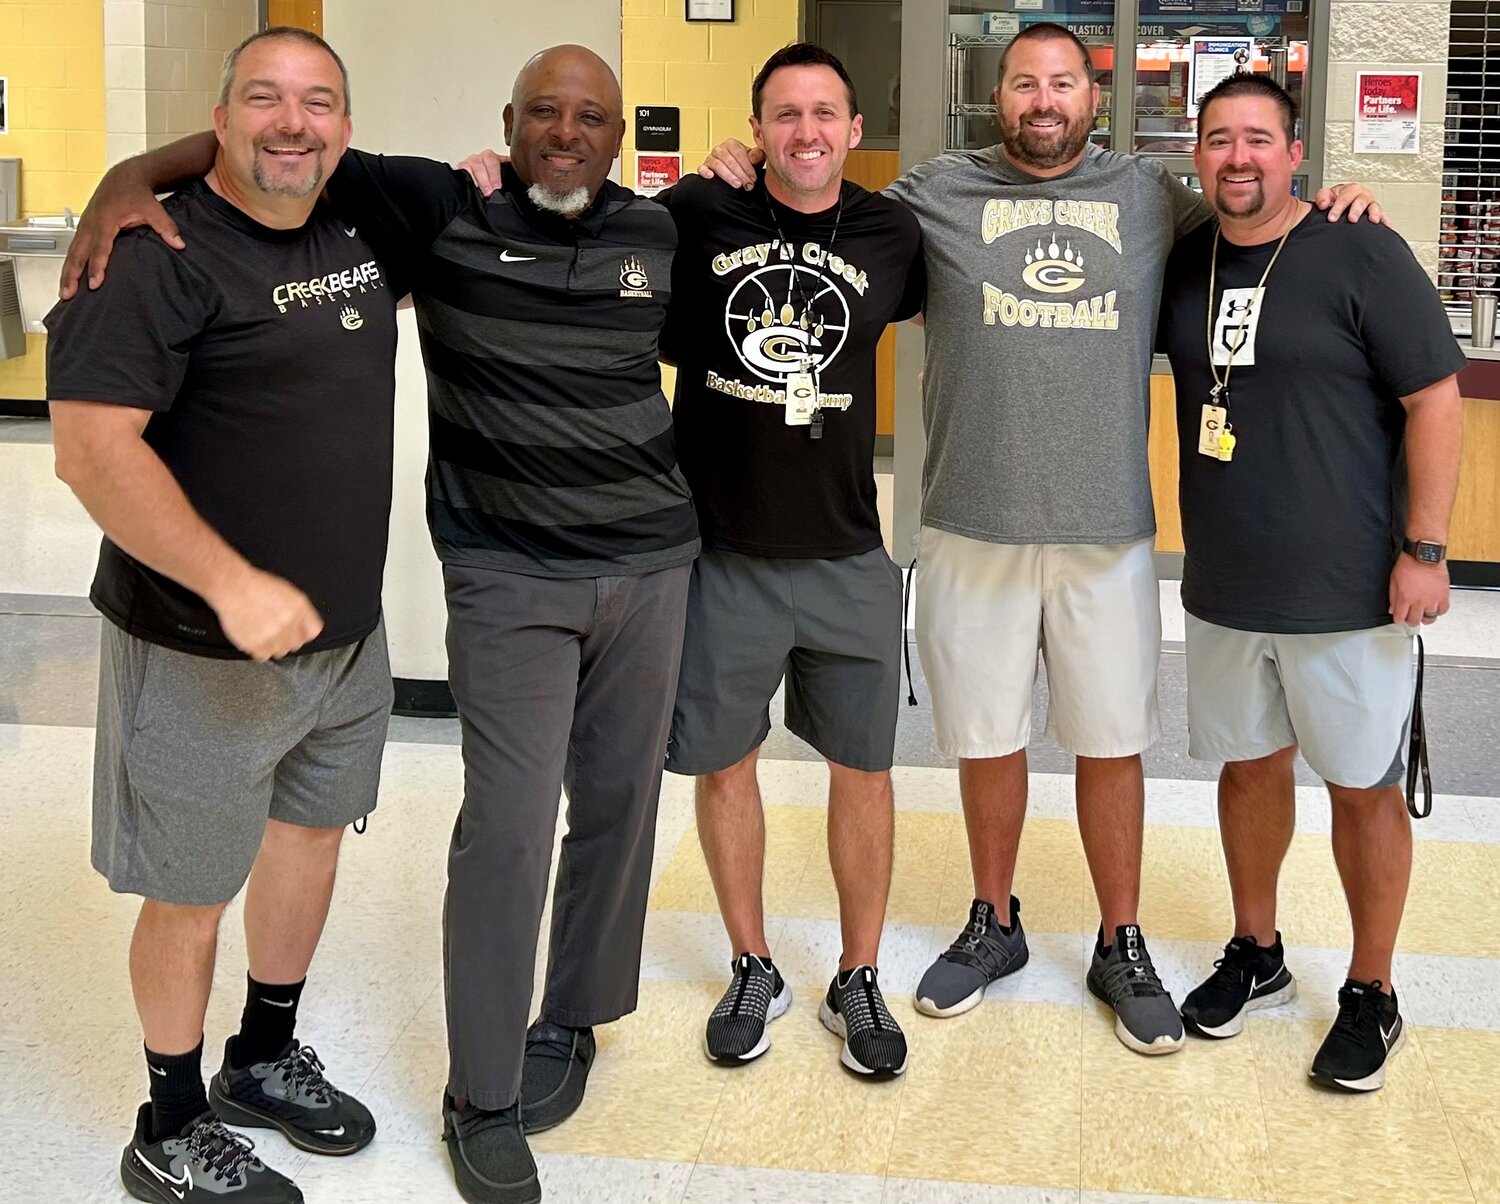 Gray’s Creek is one of only 106 schools in the state that had no coaches or athletes ejected from a game for misconduct last year. Coaches, from left, include Jeff Nance, baseball; Rick Rhoda, women’s basketball; Jonathan Grimes, men’s basketball; Jon Sherman, football; and Stuart Gilmer, softball.